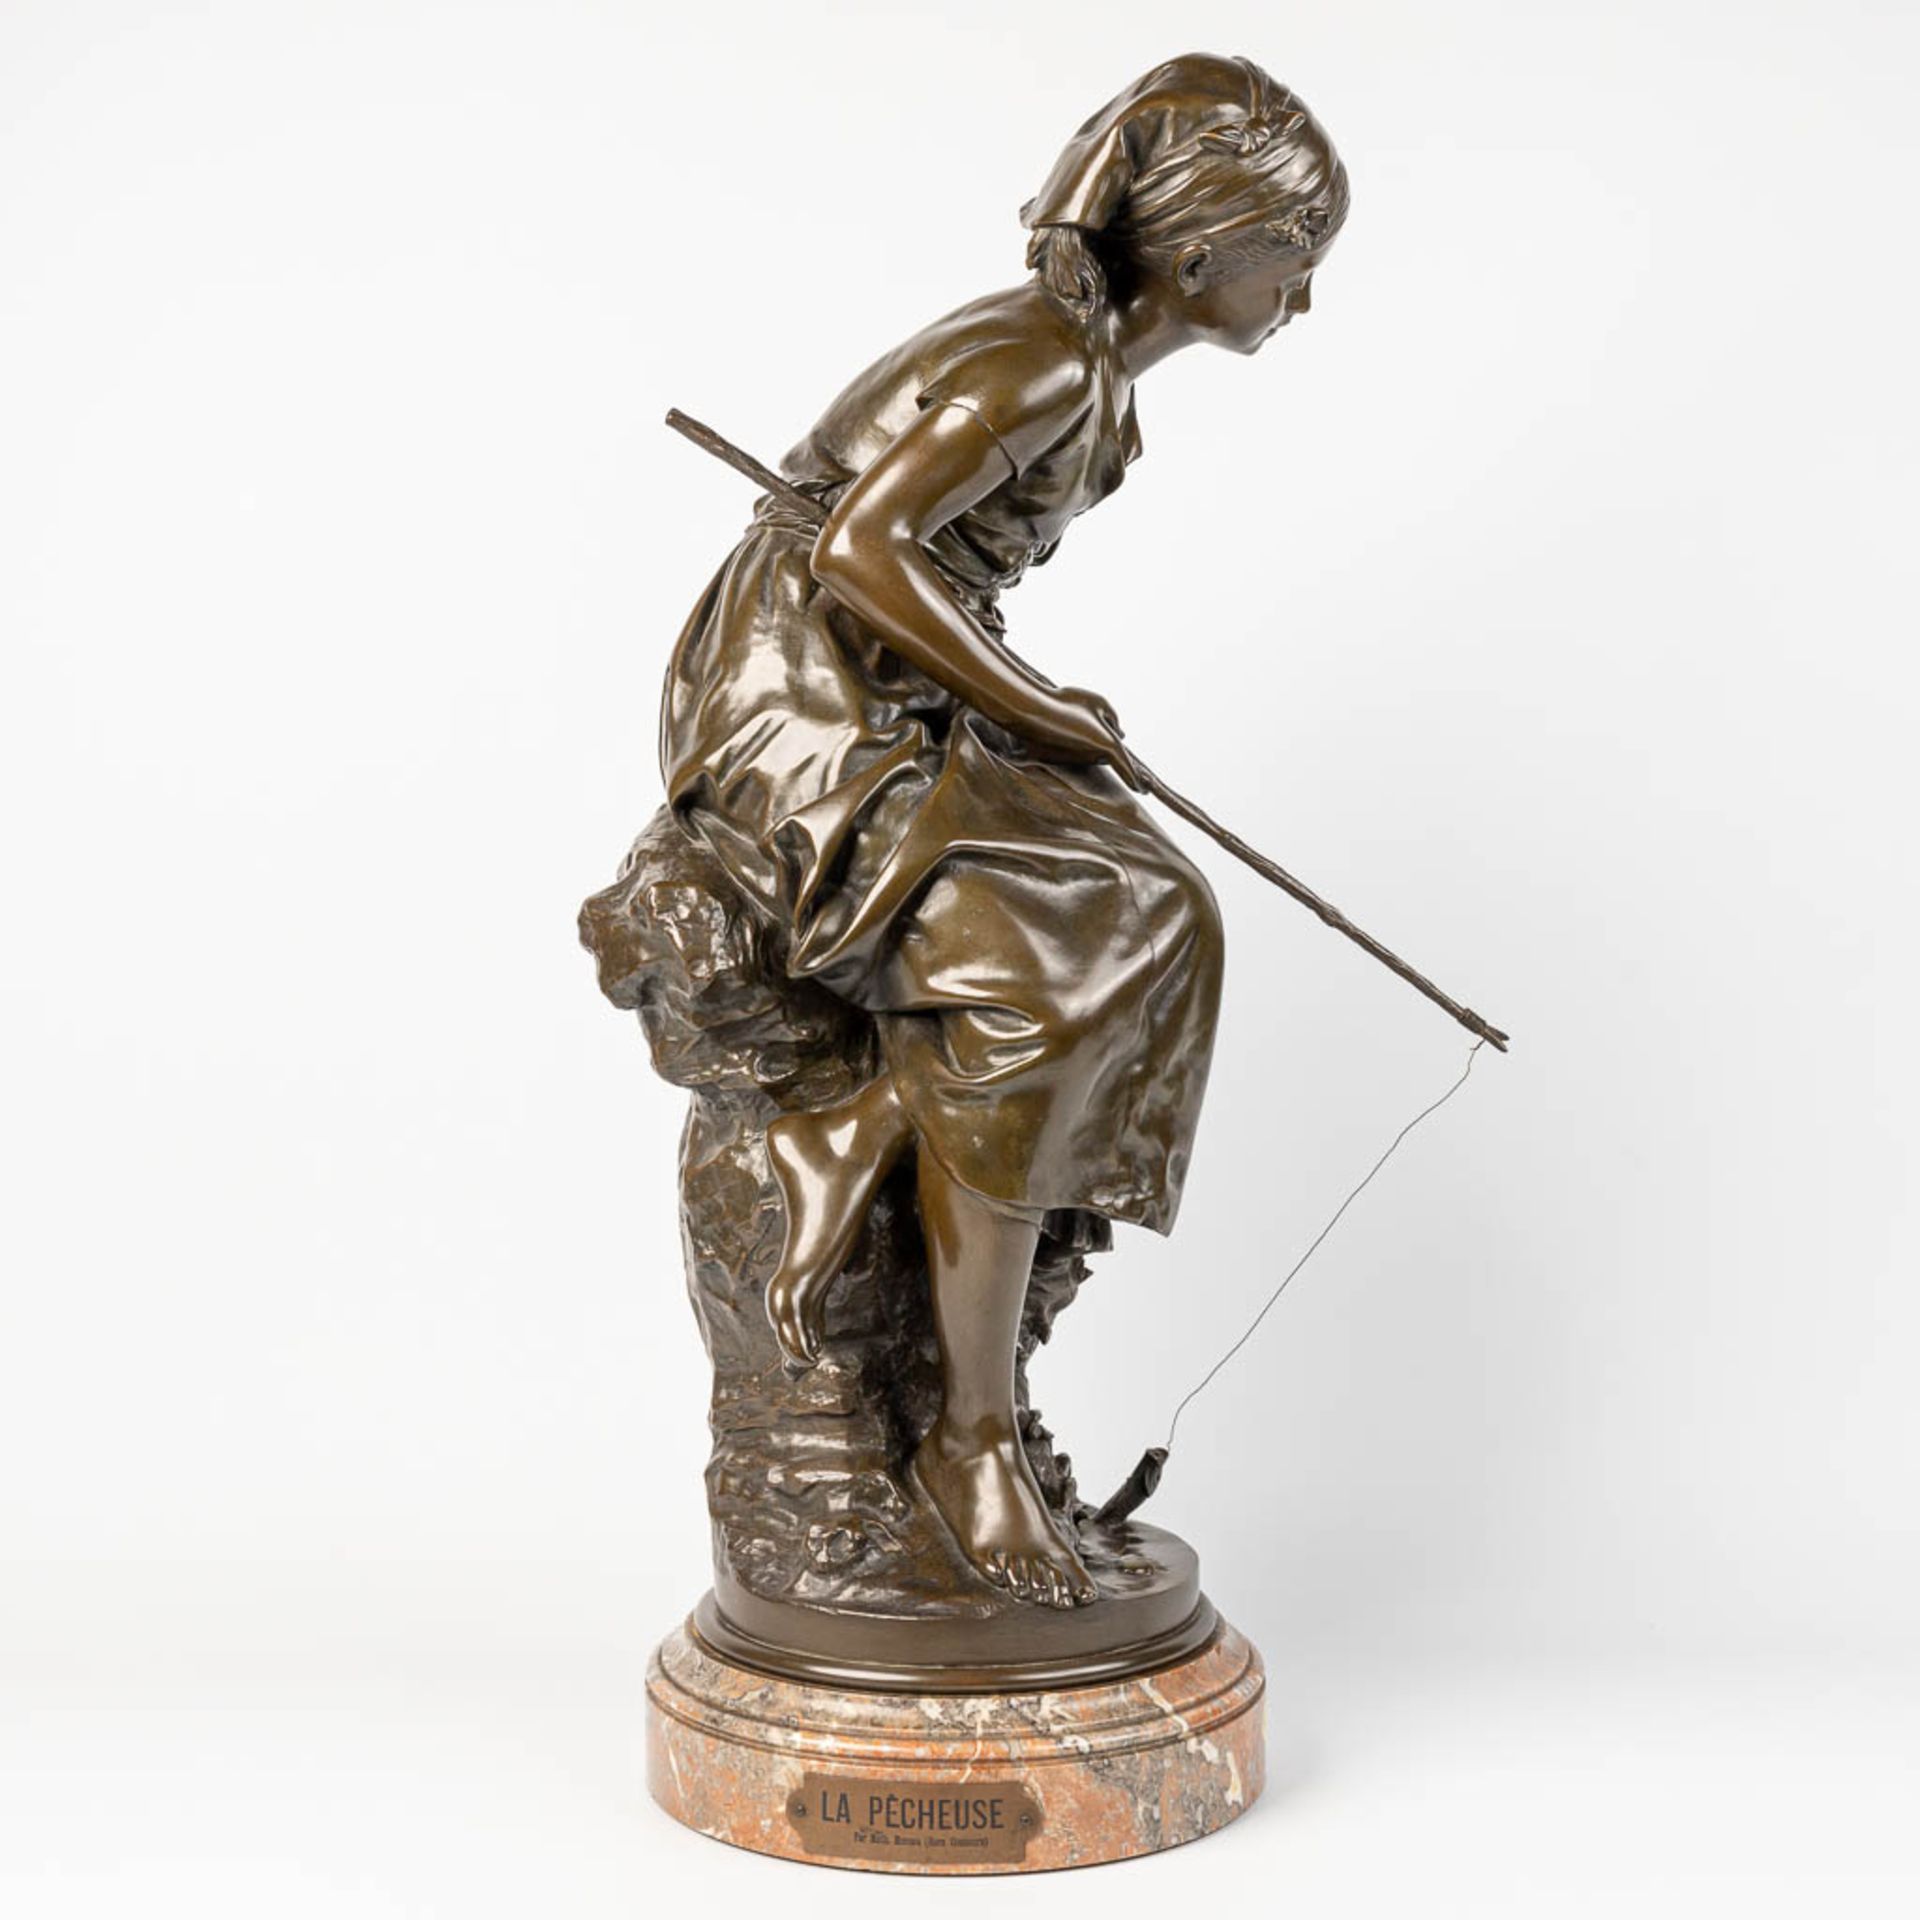 Mathurin MOREAU (1822-1912) 'La Pecheuse' a bronze statue of a fishing lady, marked Hors Concours - Image 3 of 11